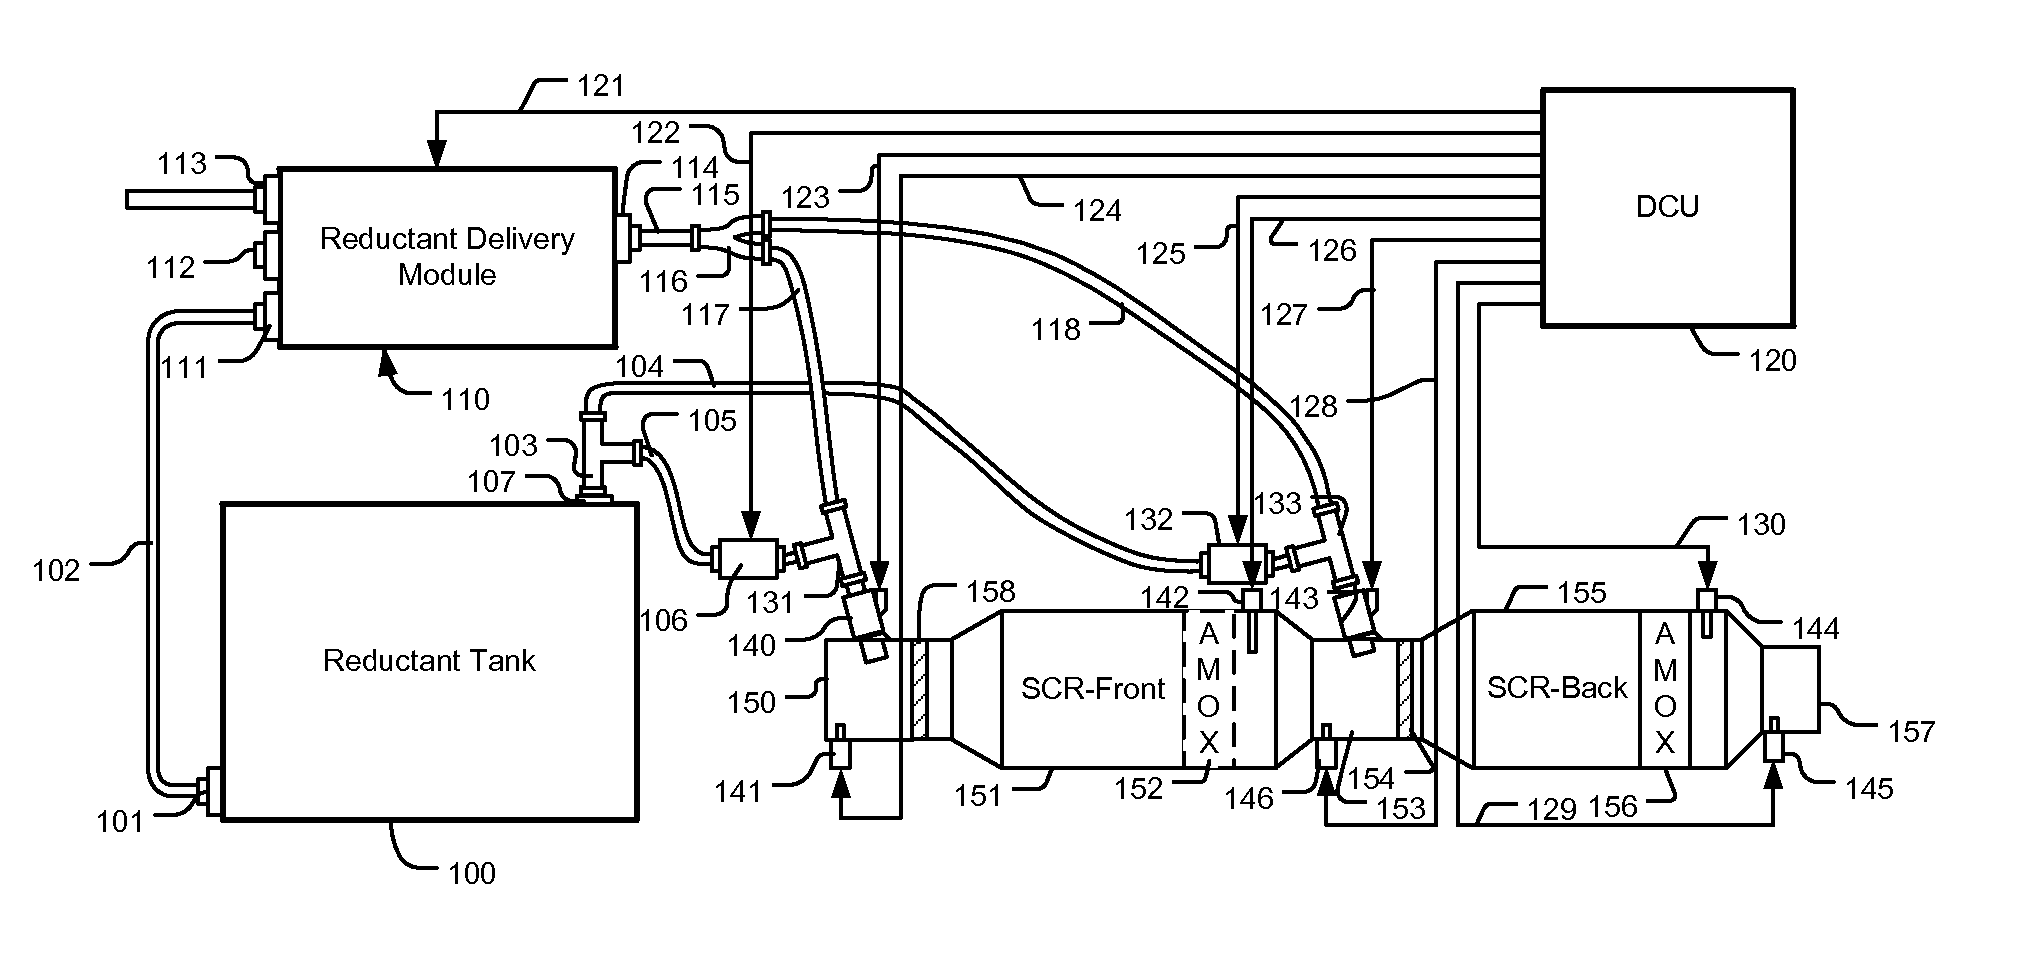 Multi-stage SCR Control and Diagnostic System